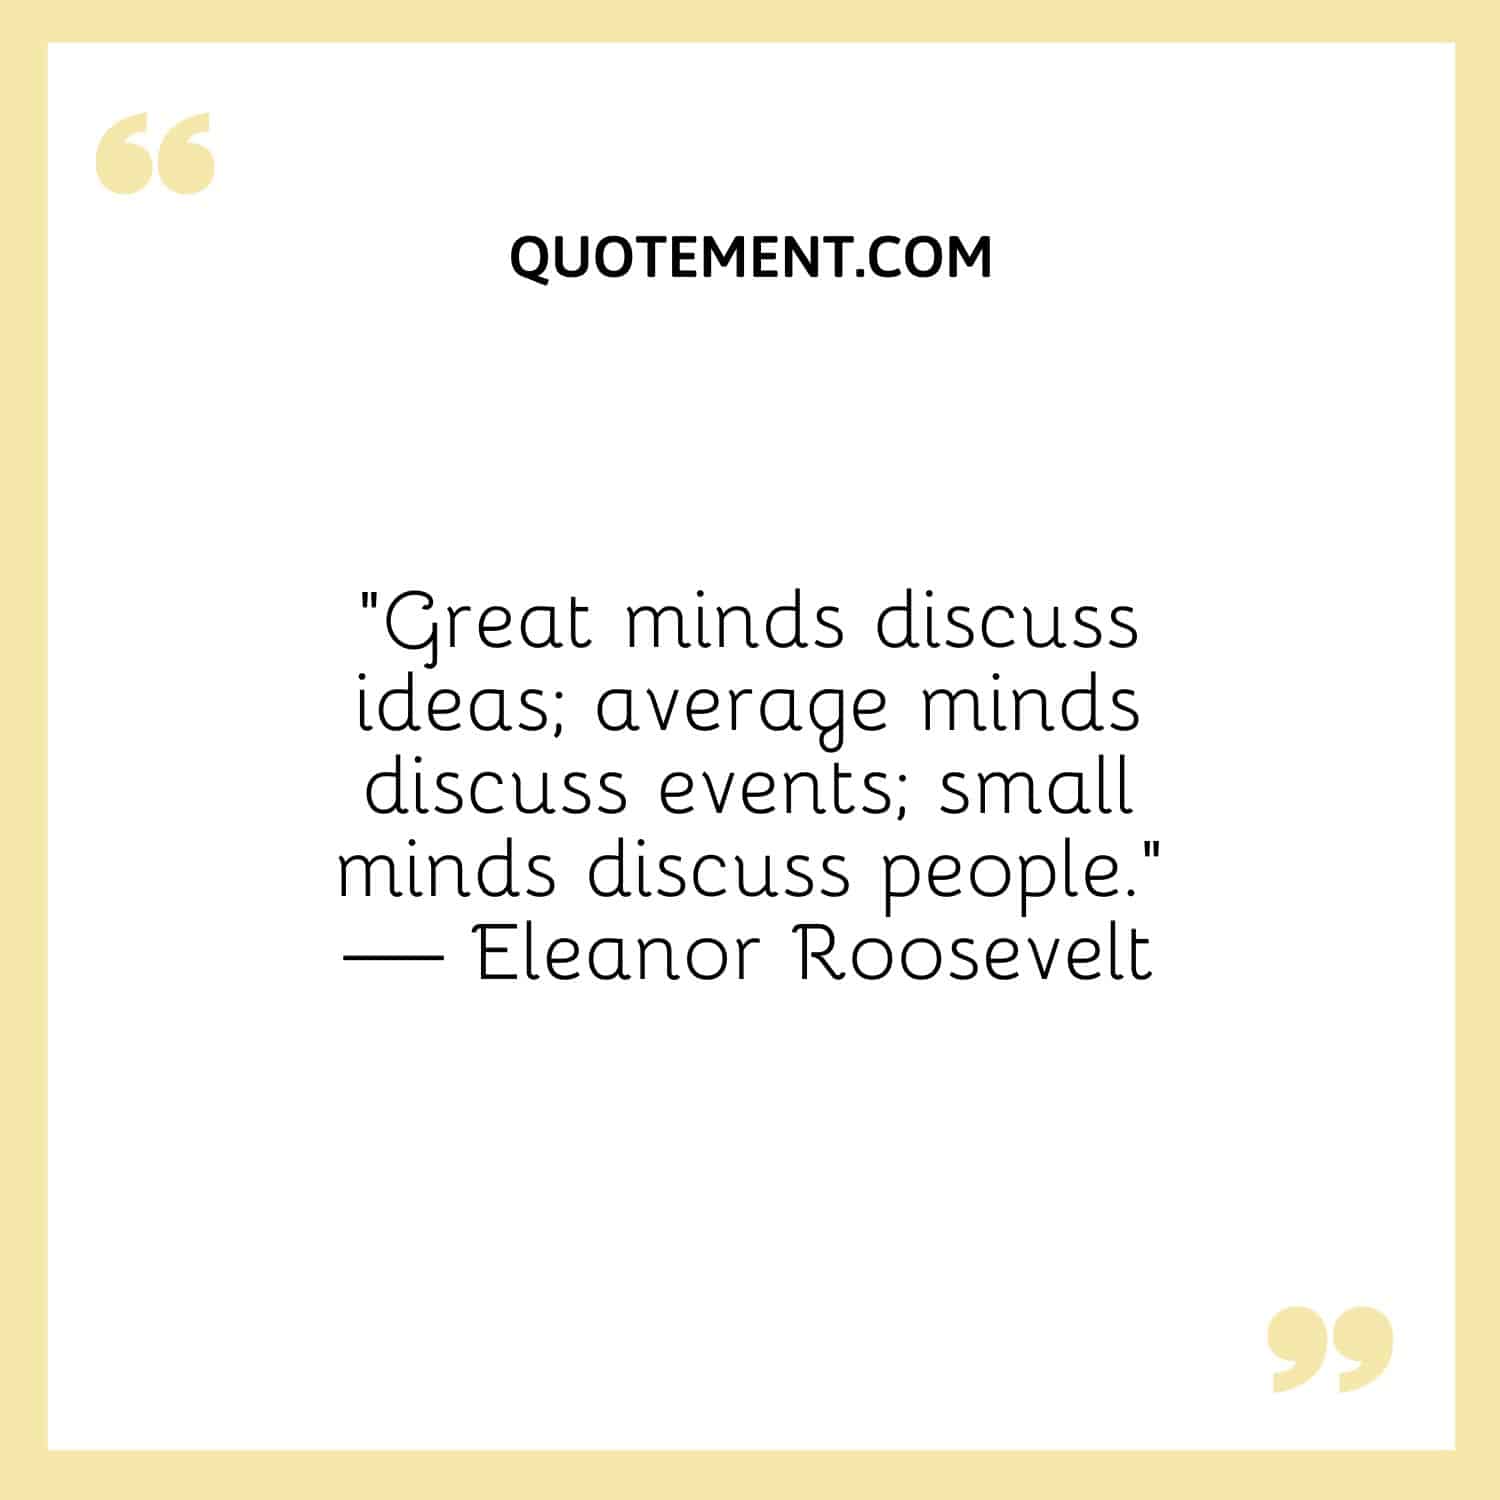 “Great minds discuss ideas; average minds discuss events; small minds discuss people.” — Eleanor Roosevelt